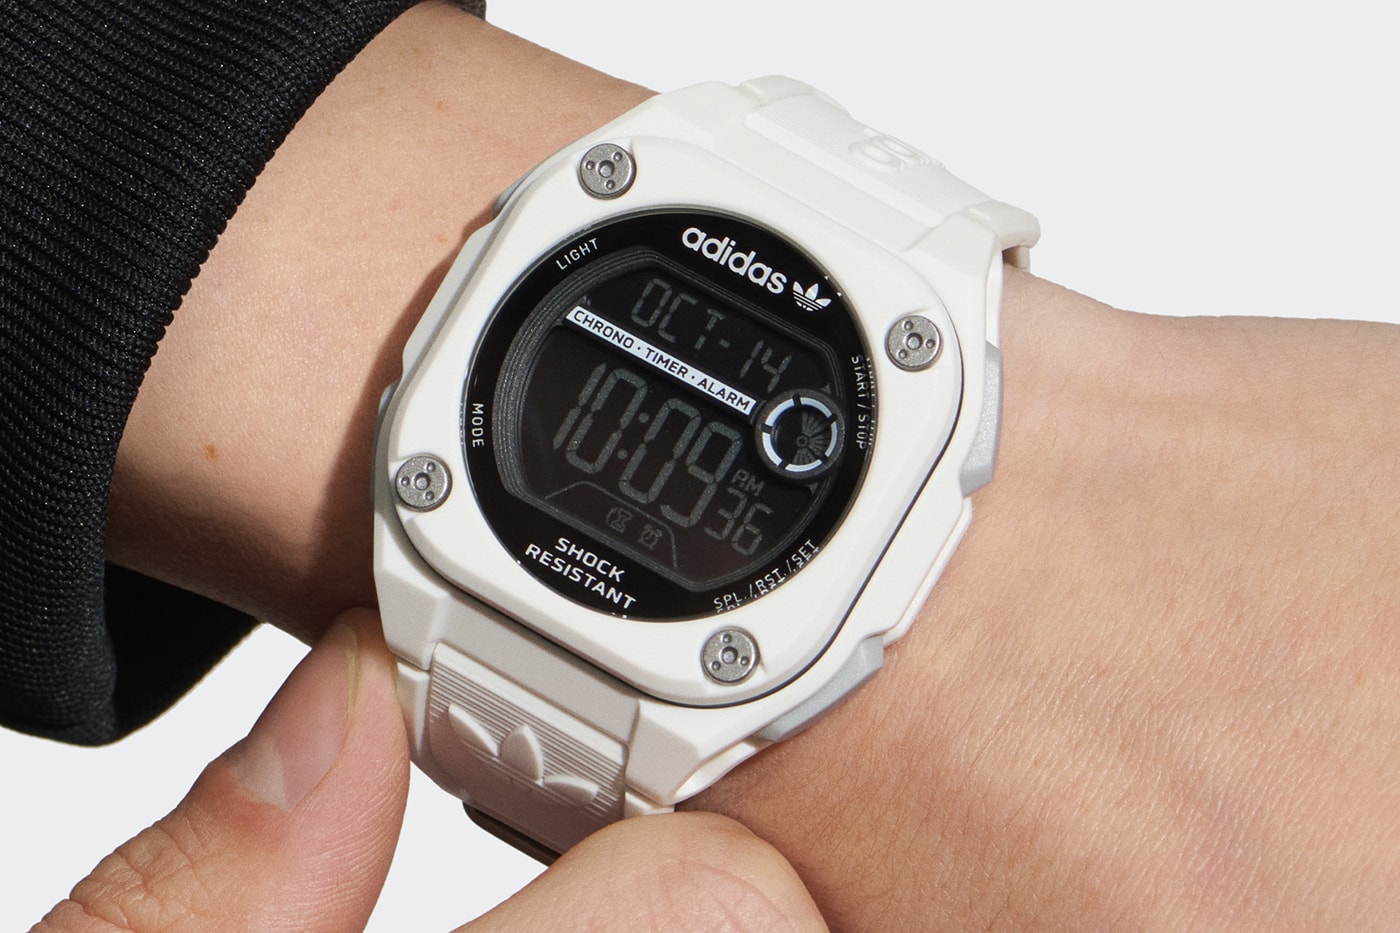 adidas Originals SS23 Watch Collection Expression One City Tech Two Retro Pop Digital Release Info